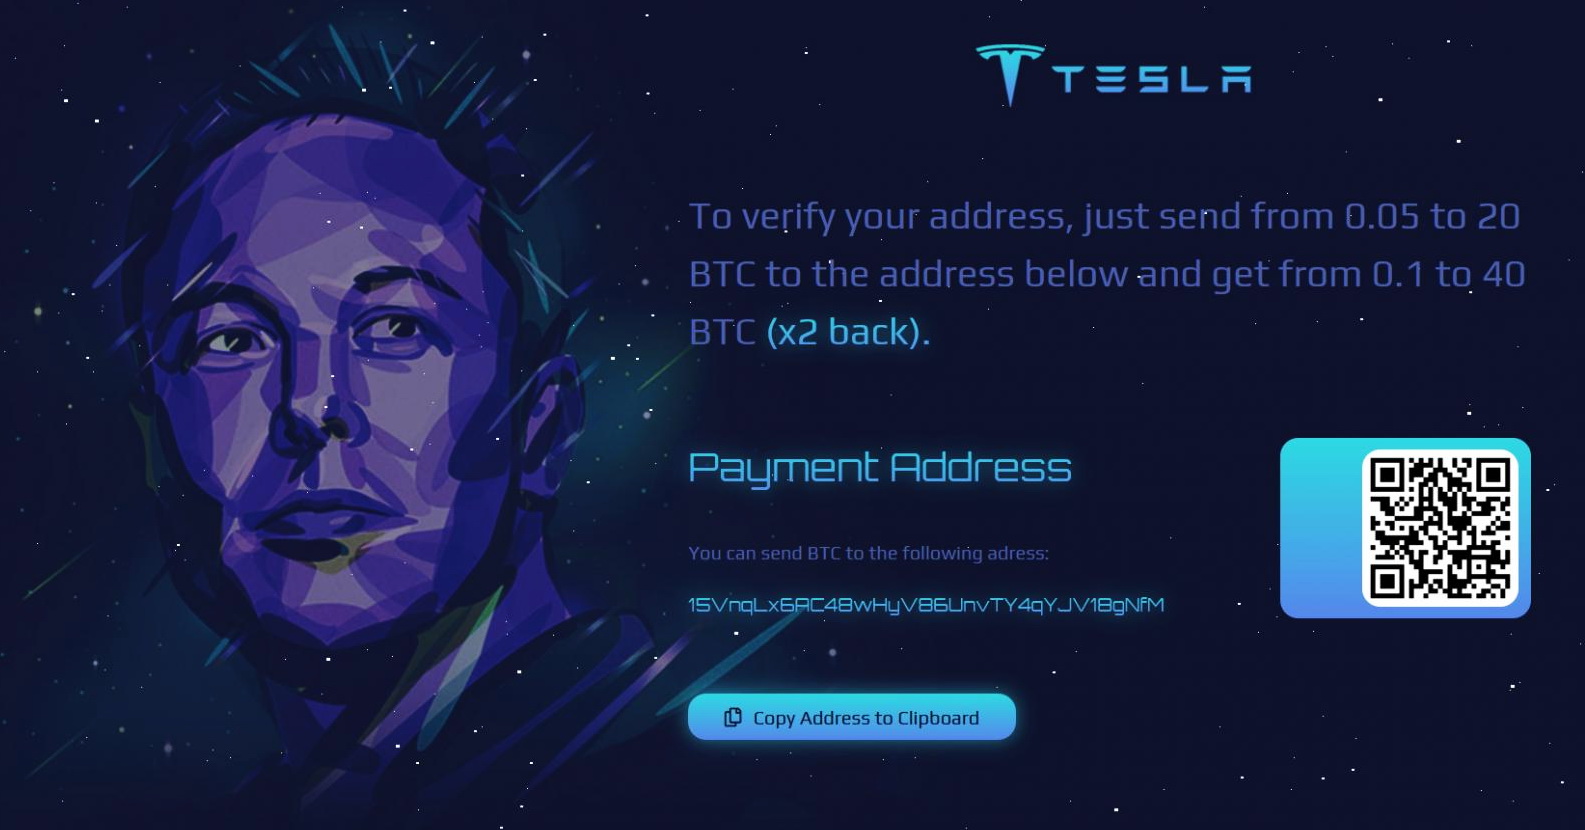 Cryptocurrency giveaways of Elon Musk